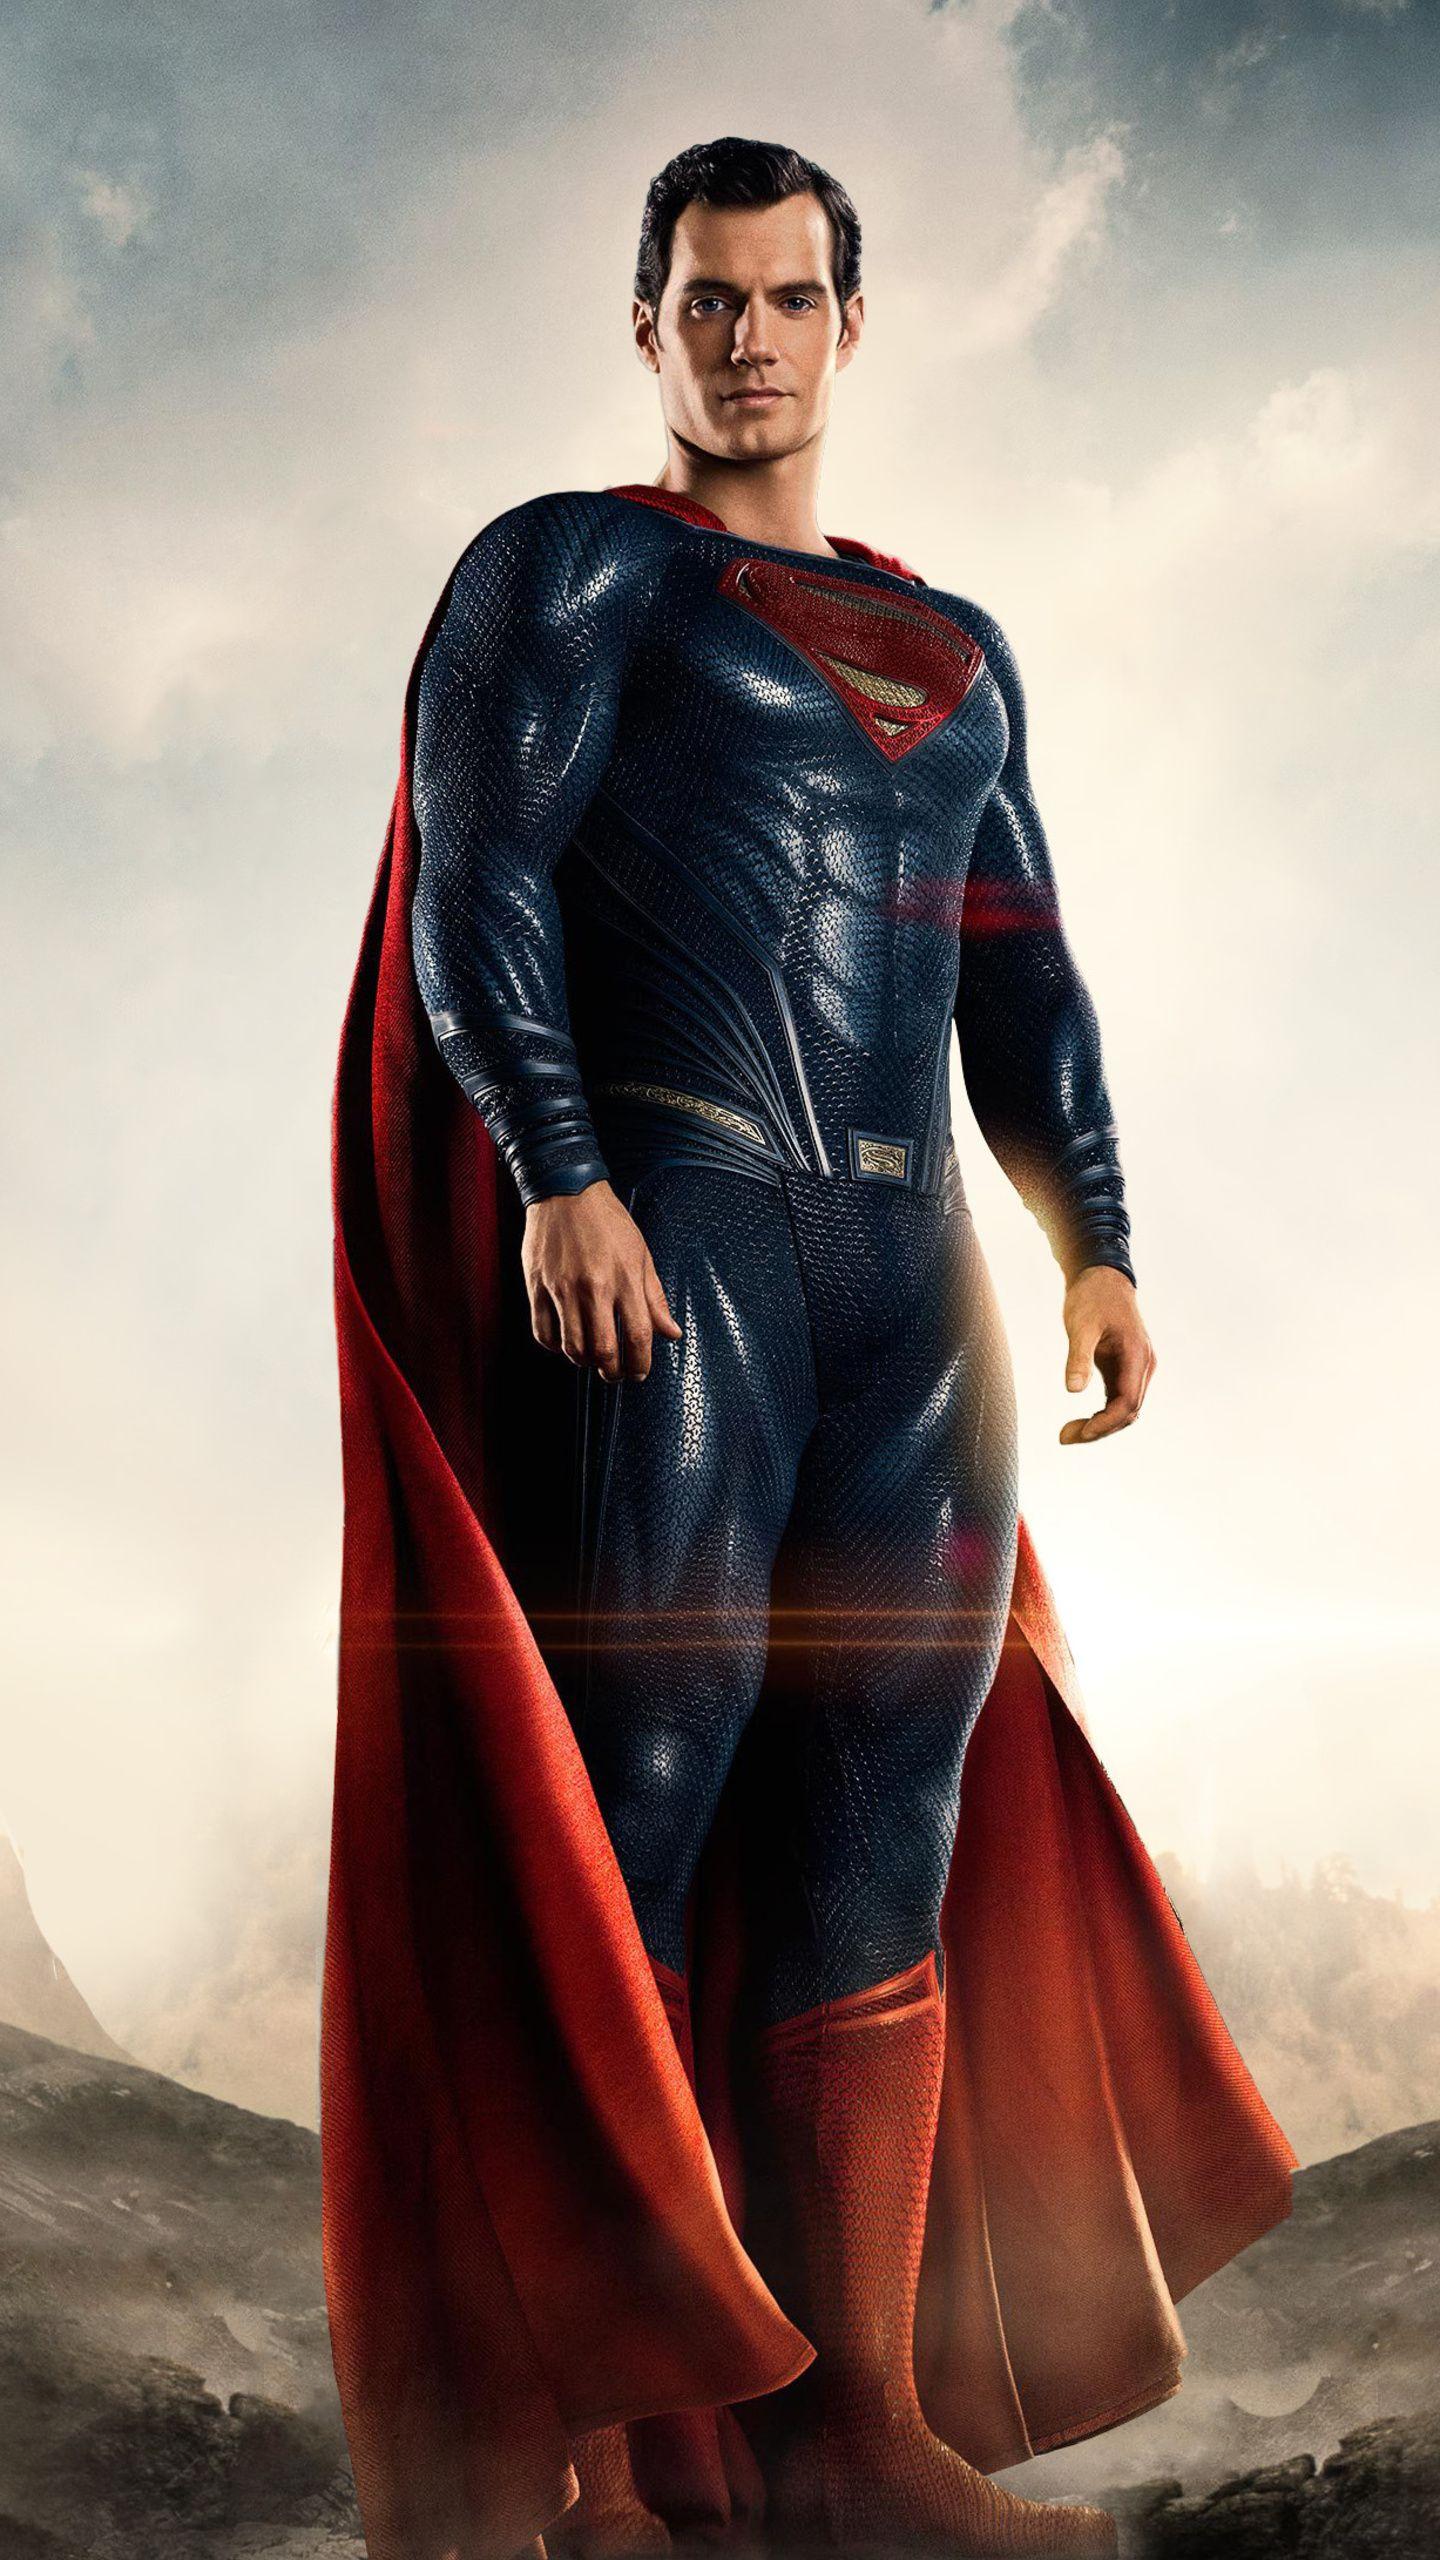 Justice League Superman Wallpapers - Top Free Justice League Superman ...